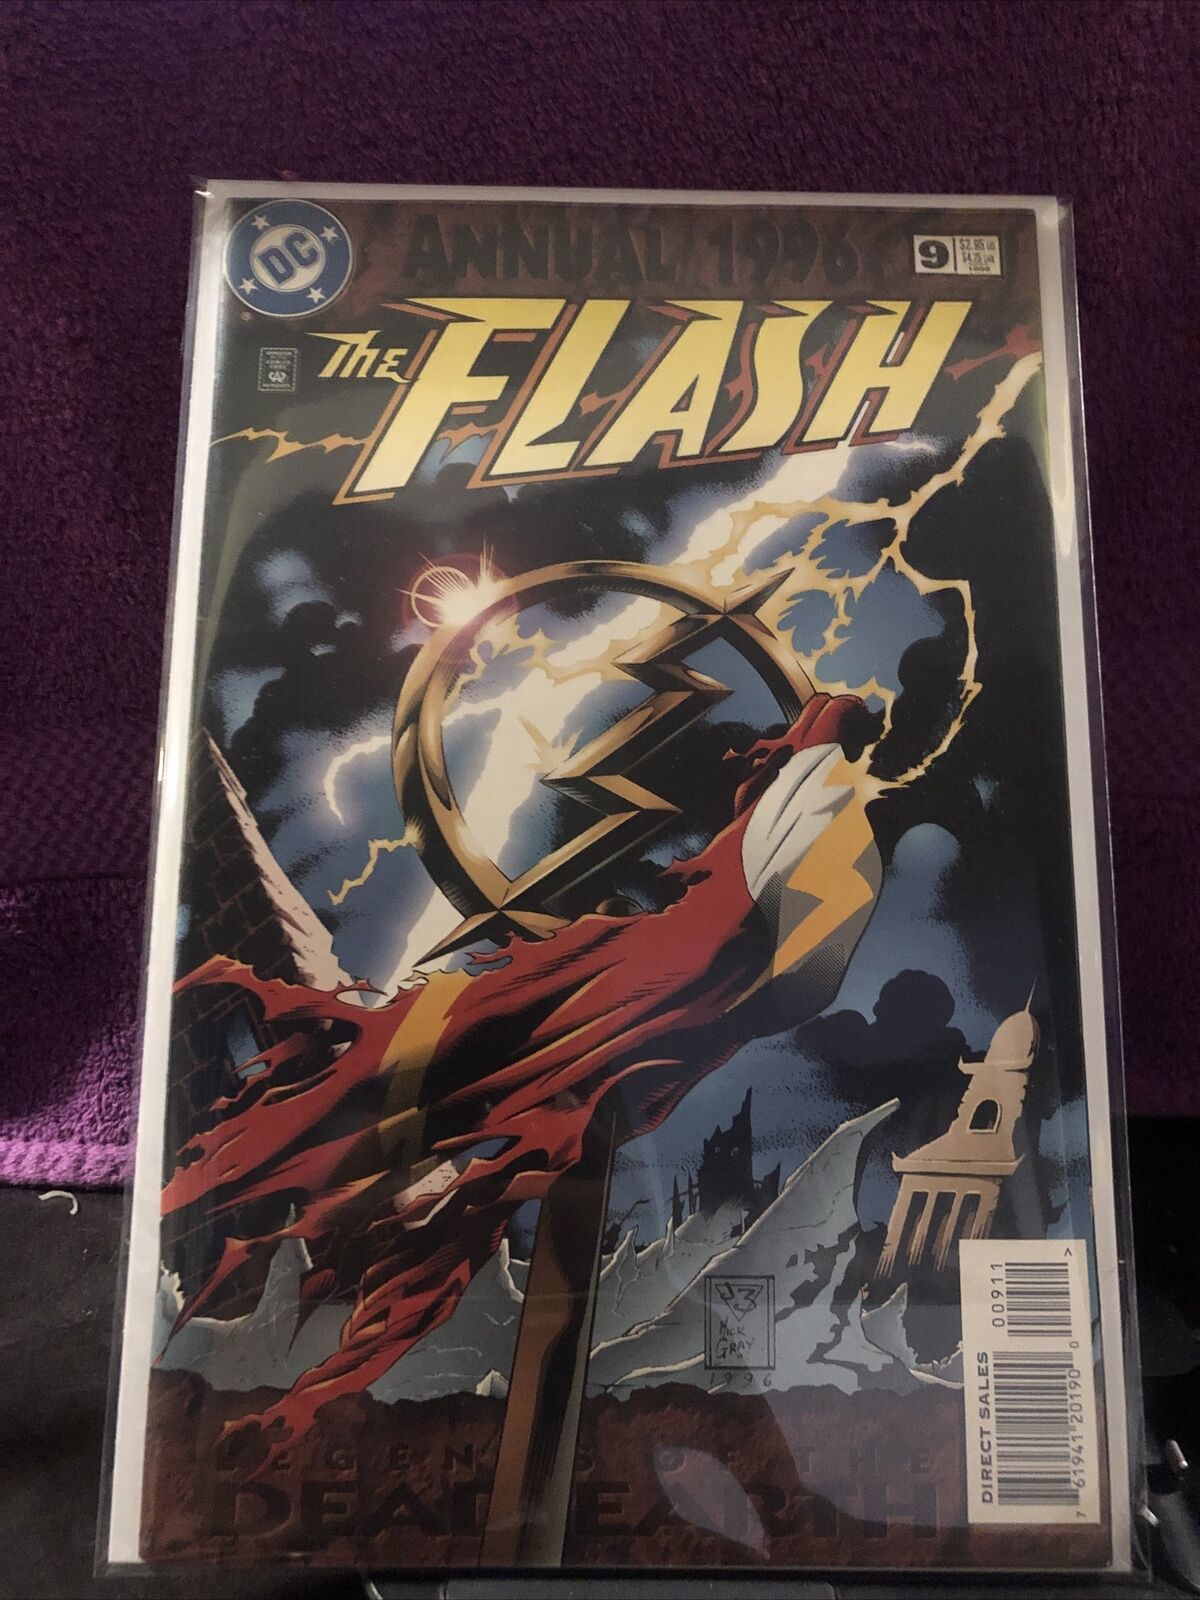 The Flash Vol 2 Annual Issue 9 \